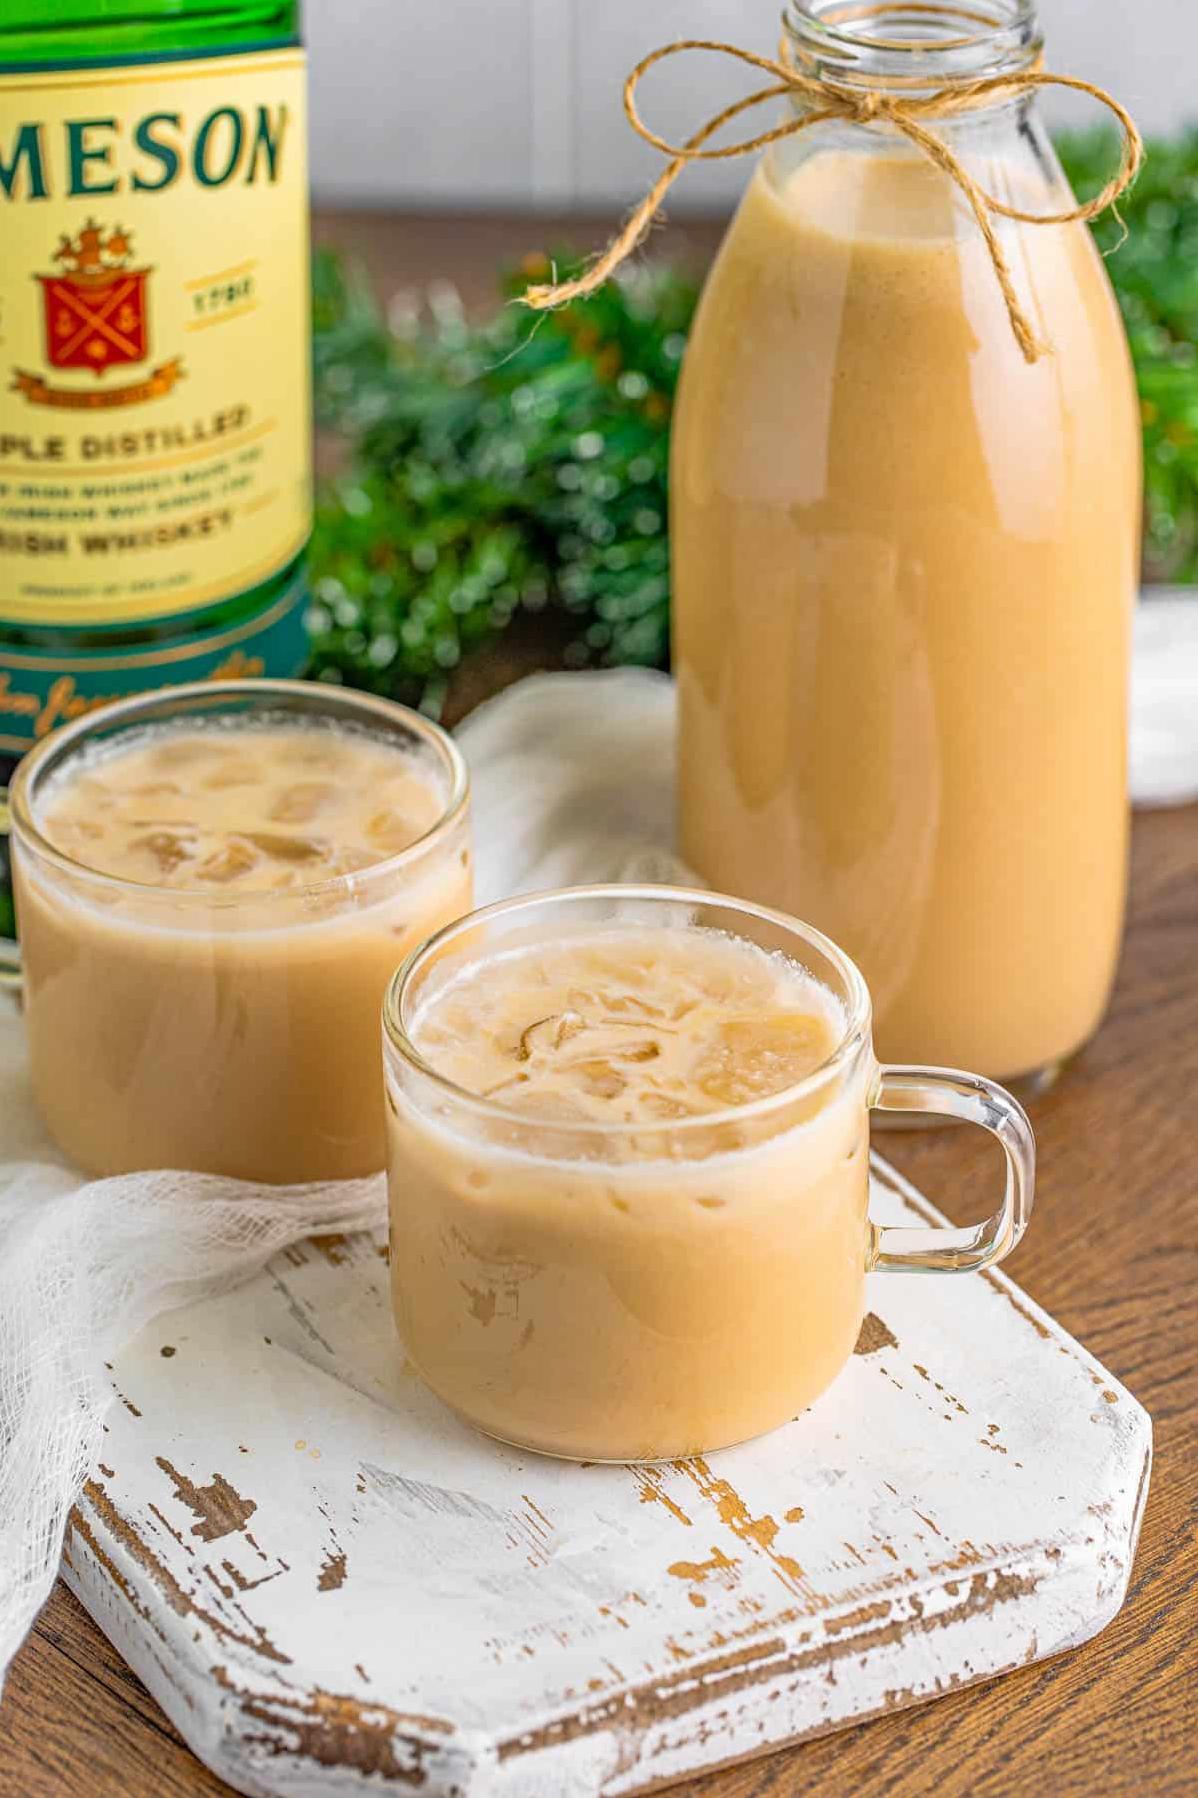  Who needs a pot of gold when you can make this simple Irish Cream Stuff?